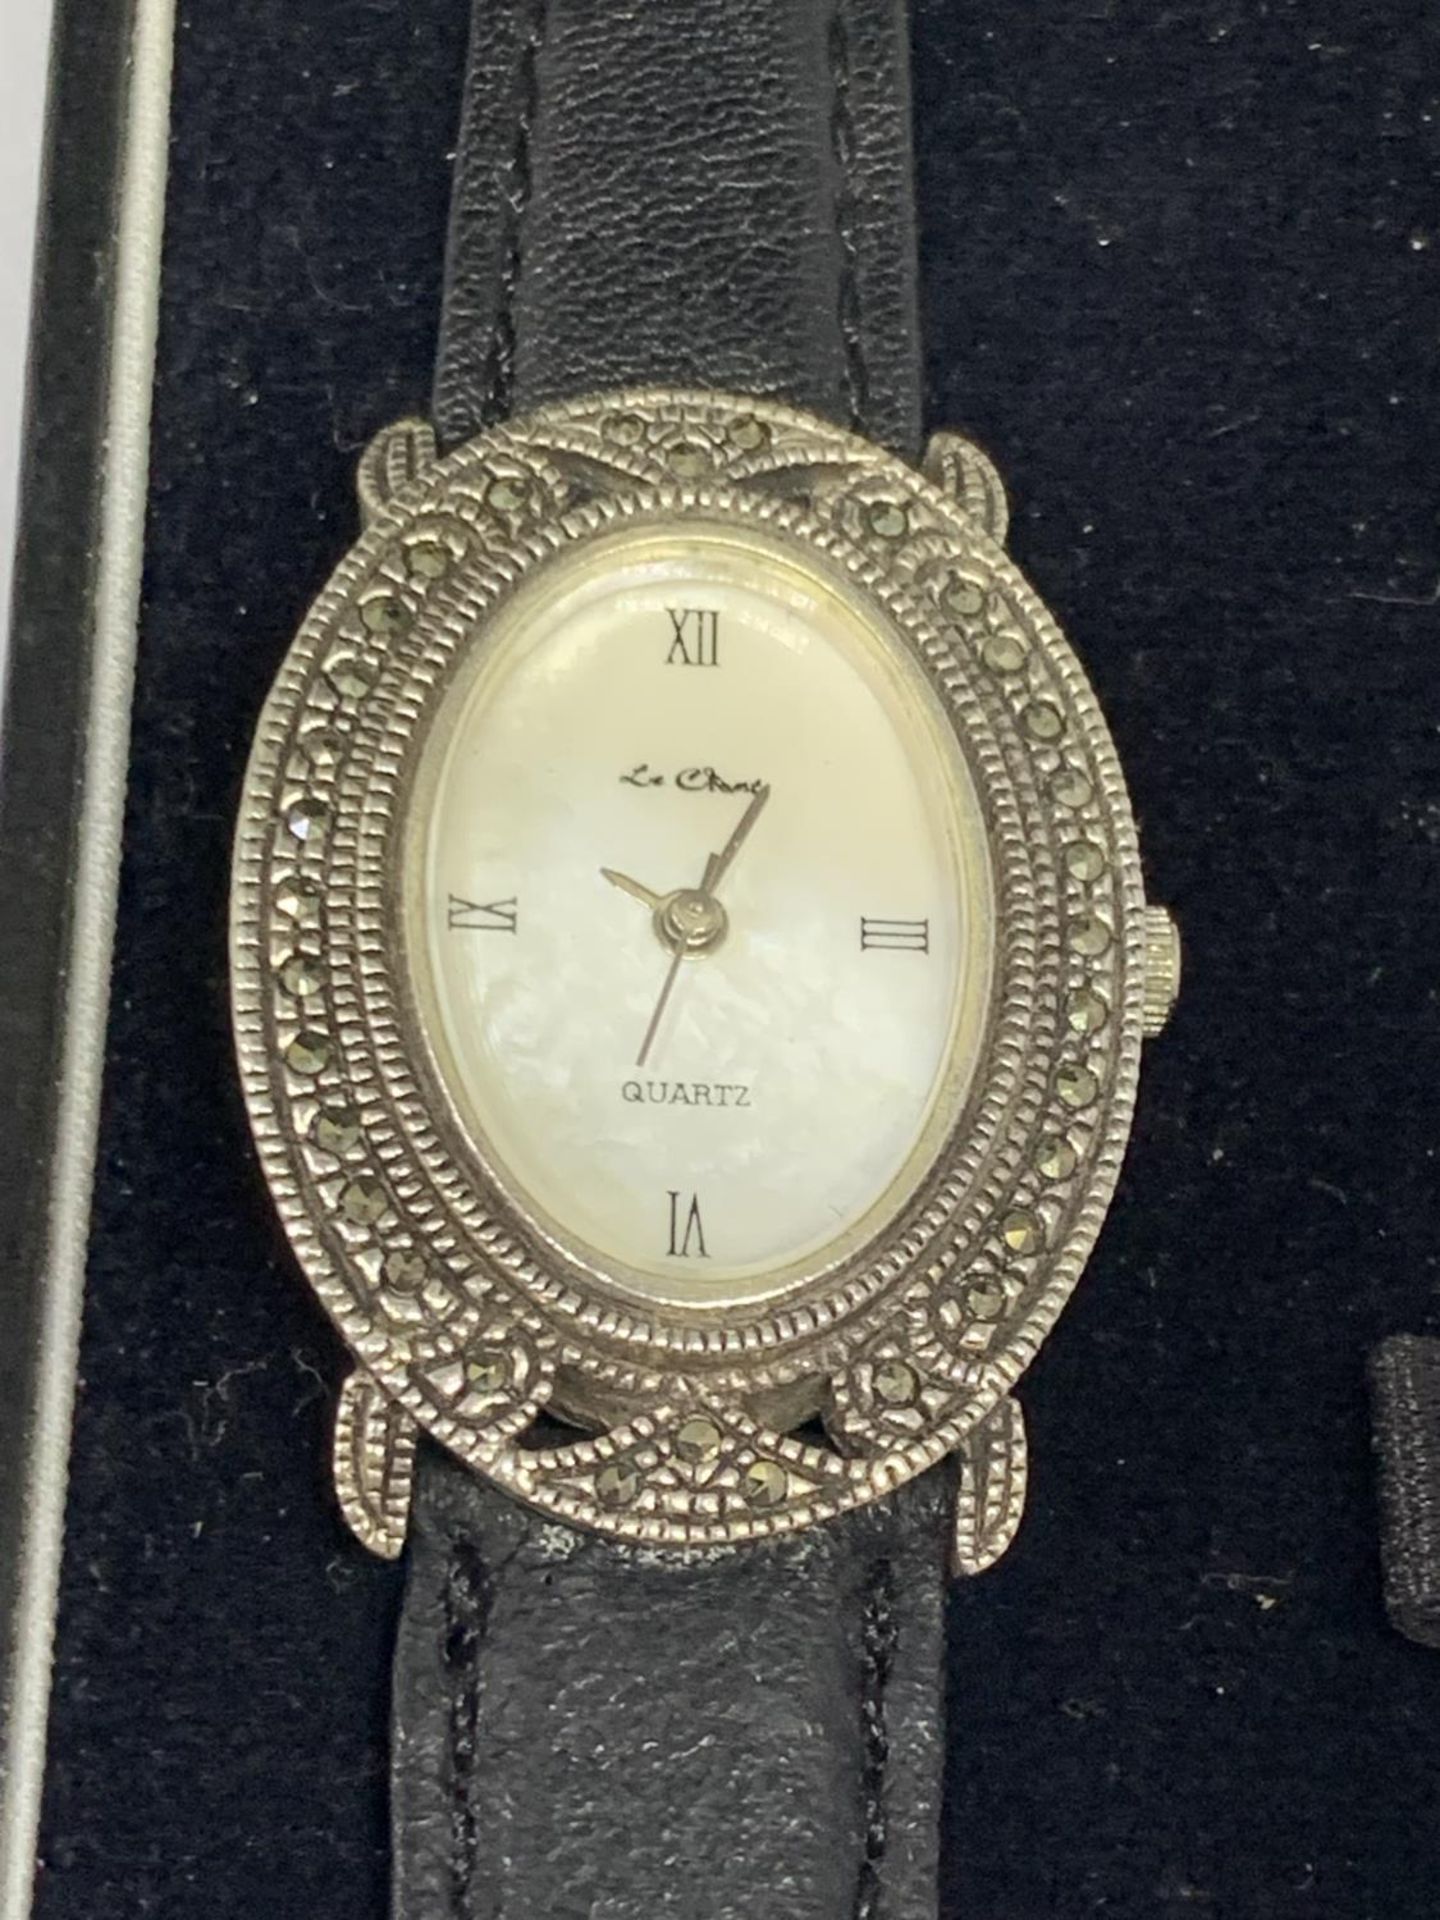 A SILVER ART DECO LADIES WRIST WATCH IN A PRESENTATION BOX SEEN WORKING BUT NO WARRANTY - Image 2 of 2